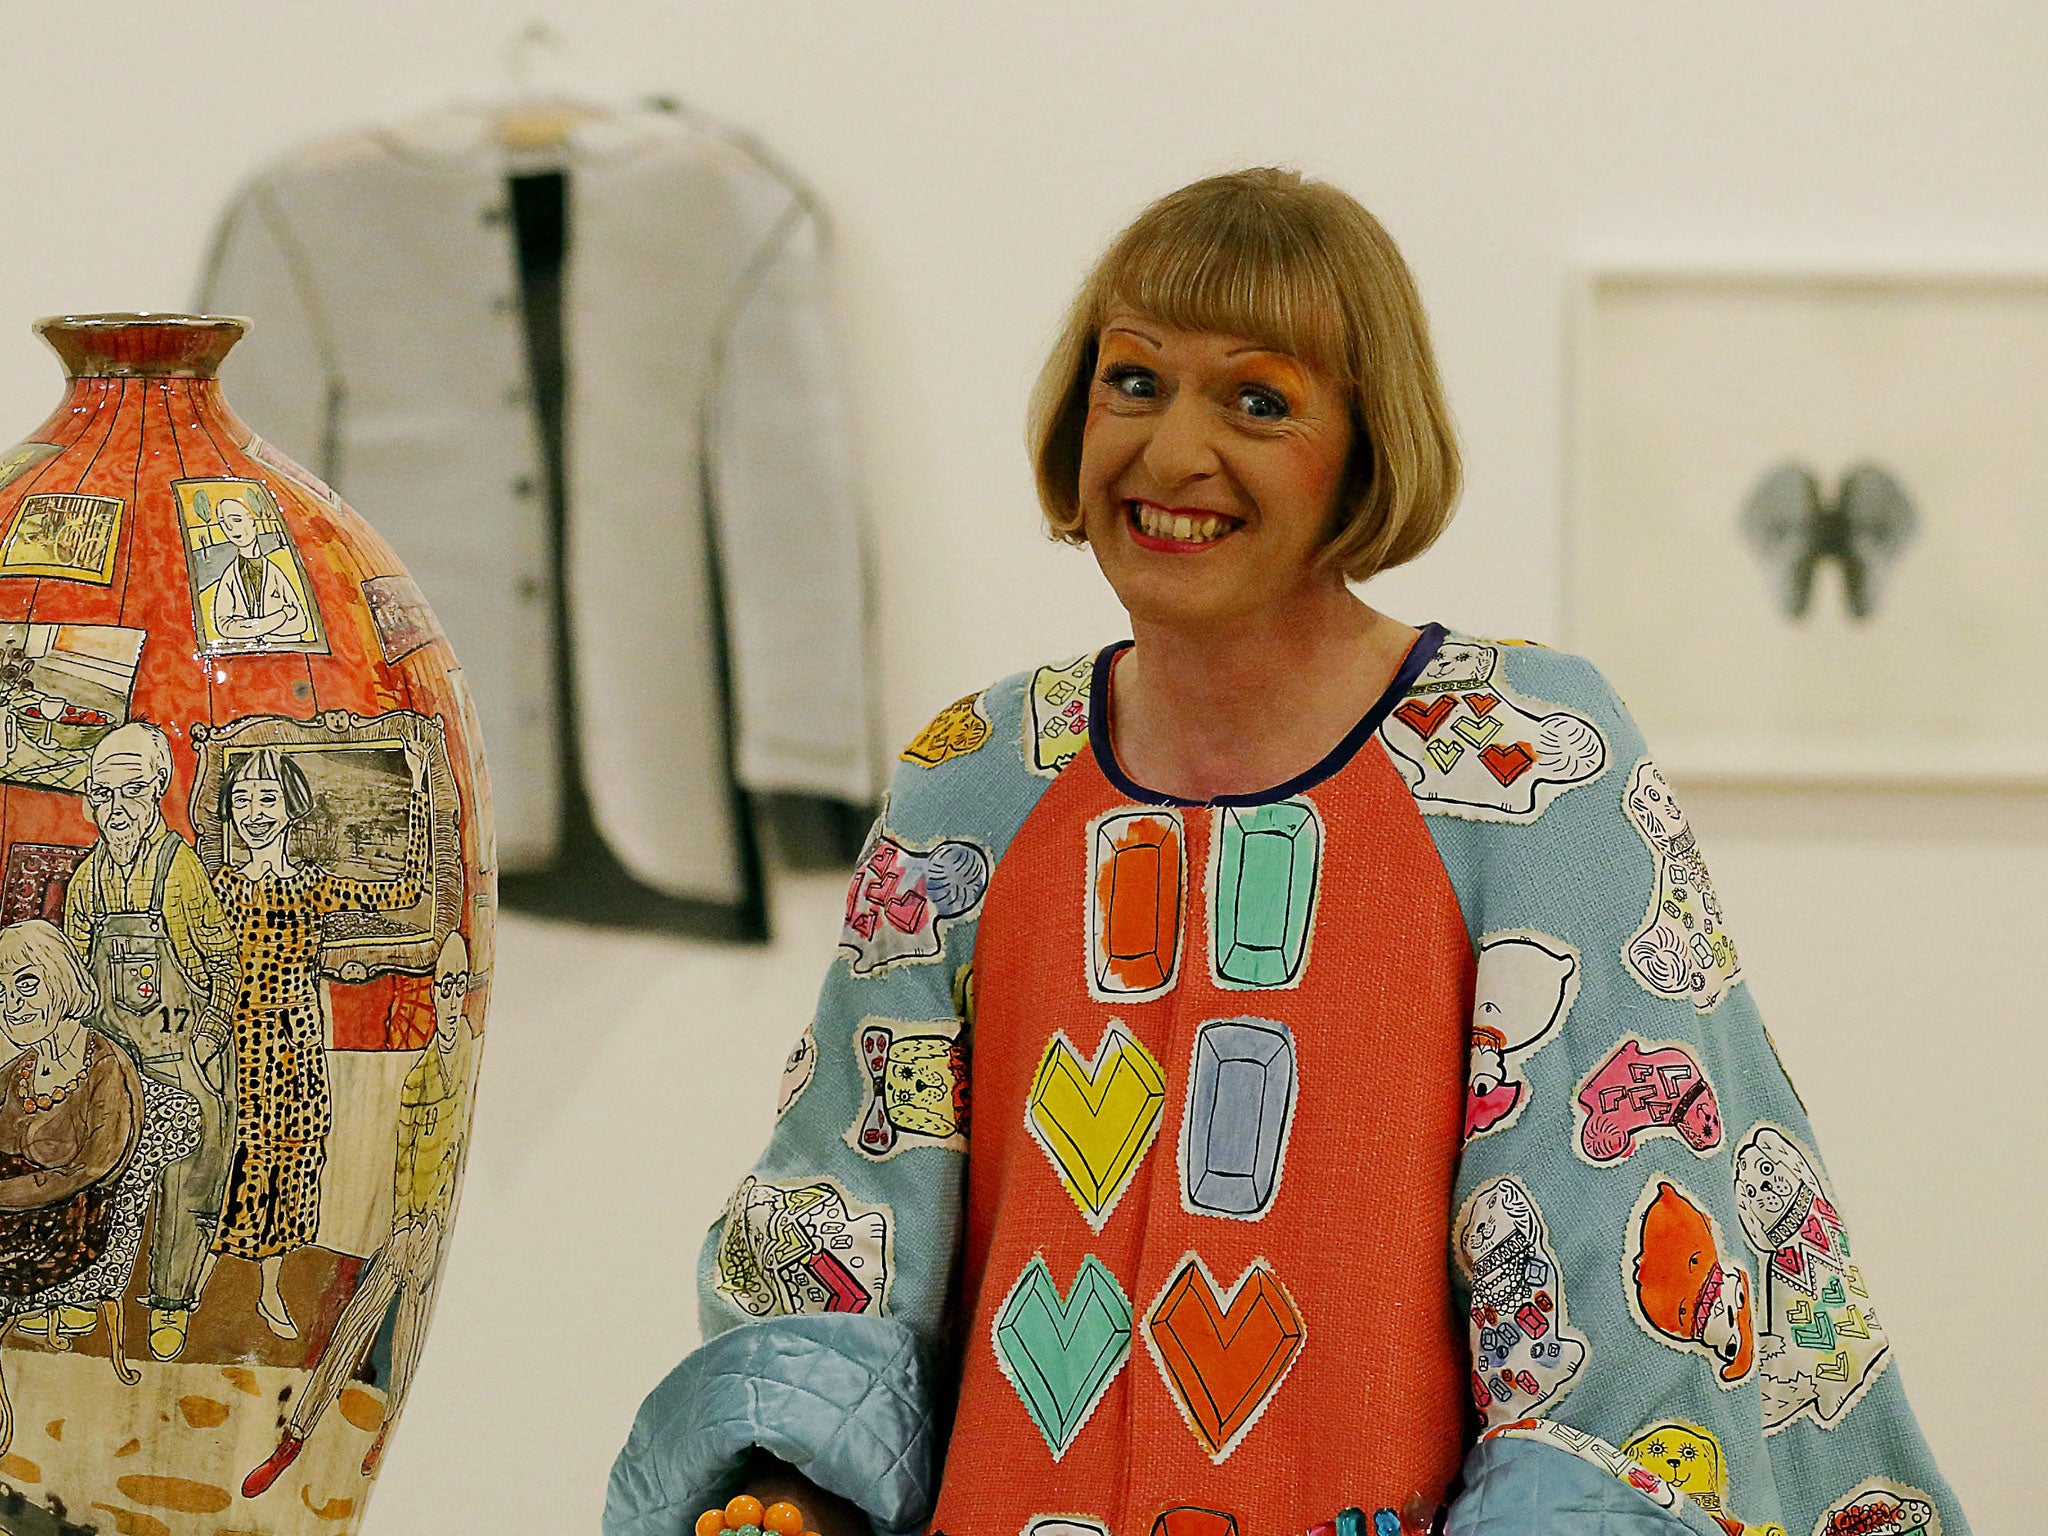 Turner Prize-winning artist Grayson Perry has attacked Damien Hirst's work as 'hackneyed' and 'tatty'